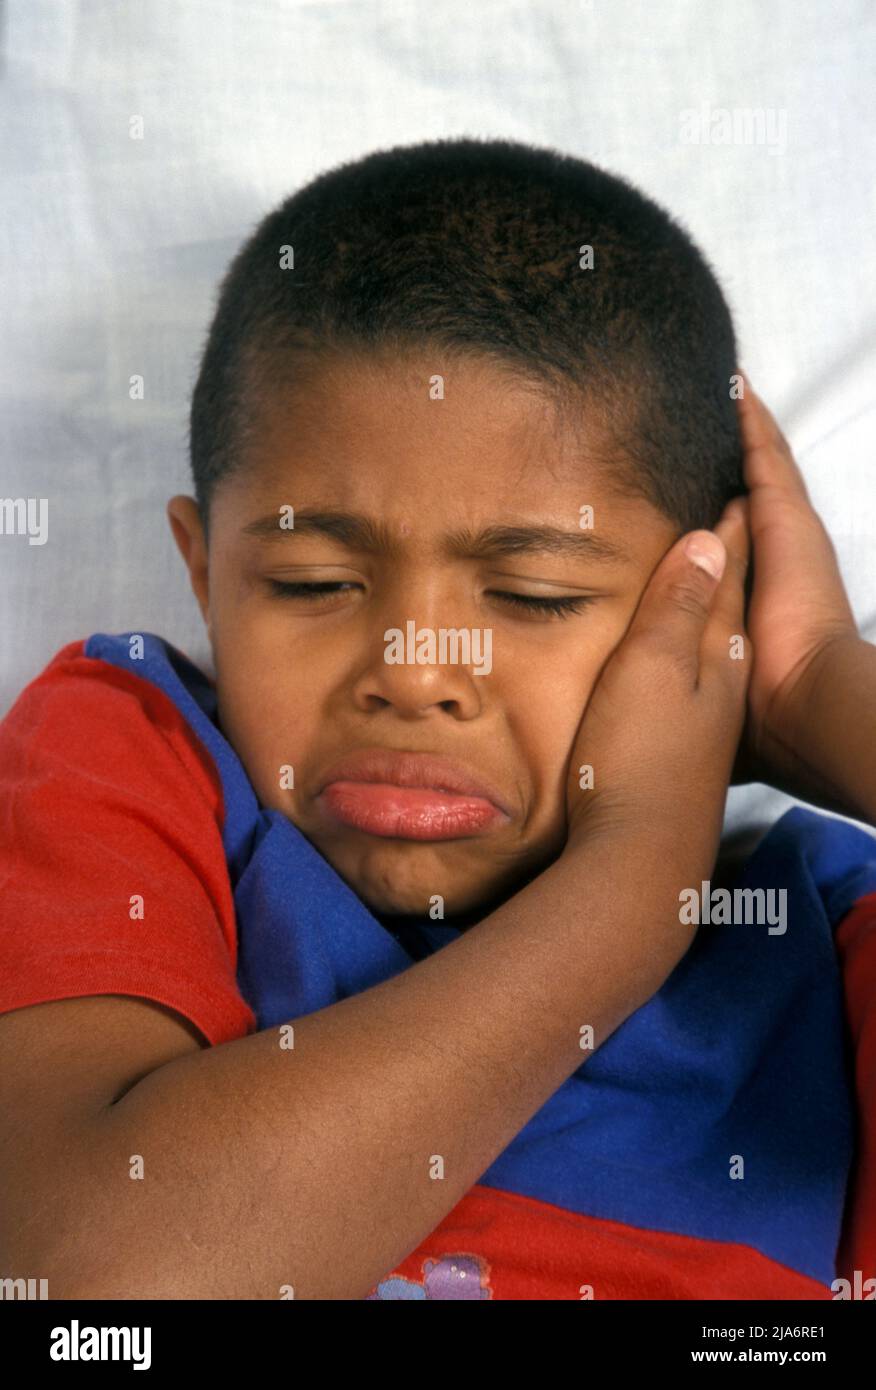 young black boy with tooth or earache Stock Photo